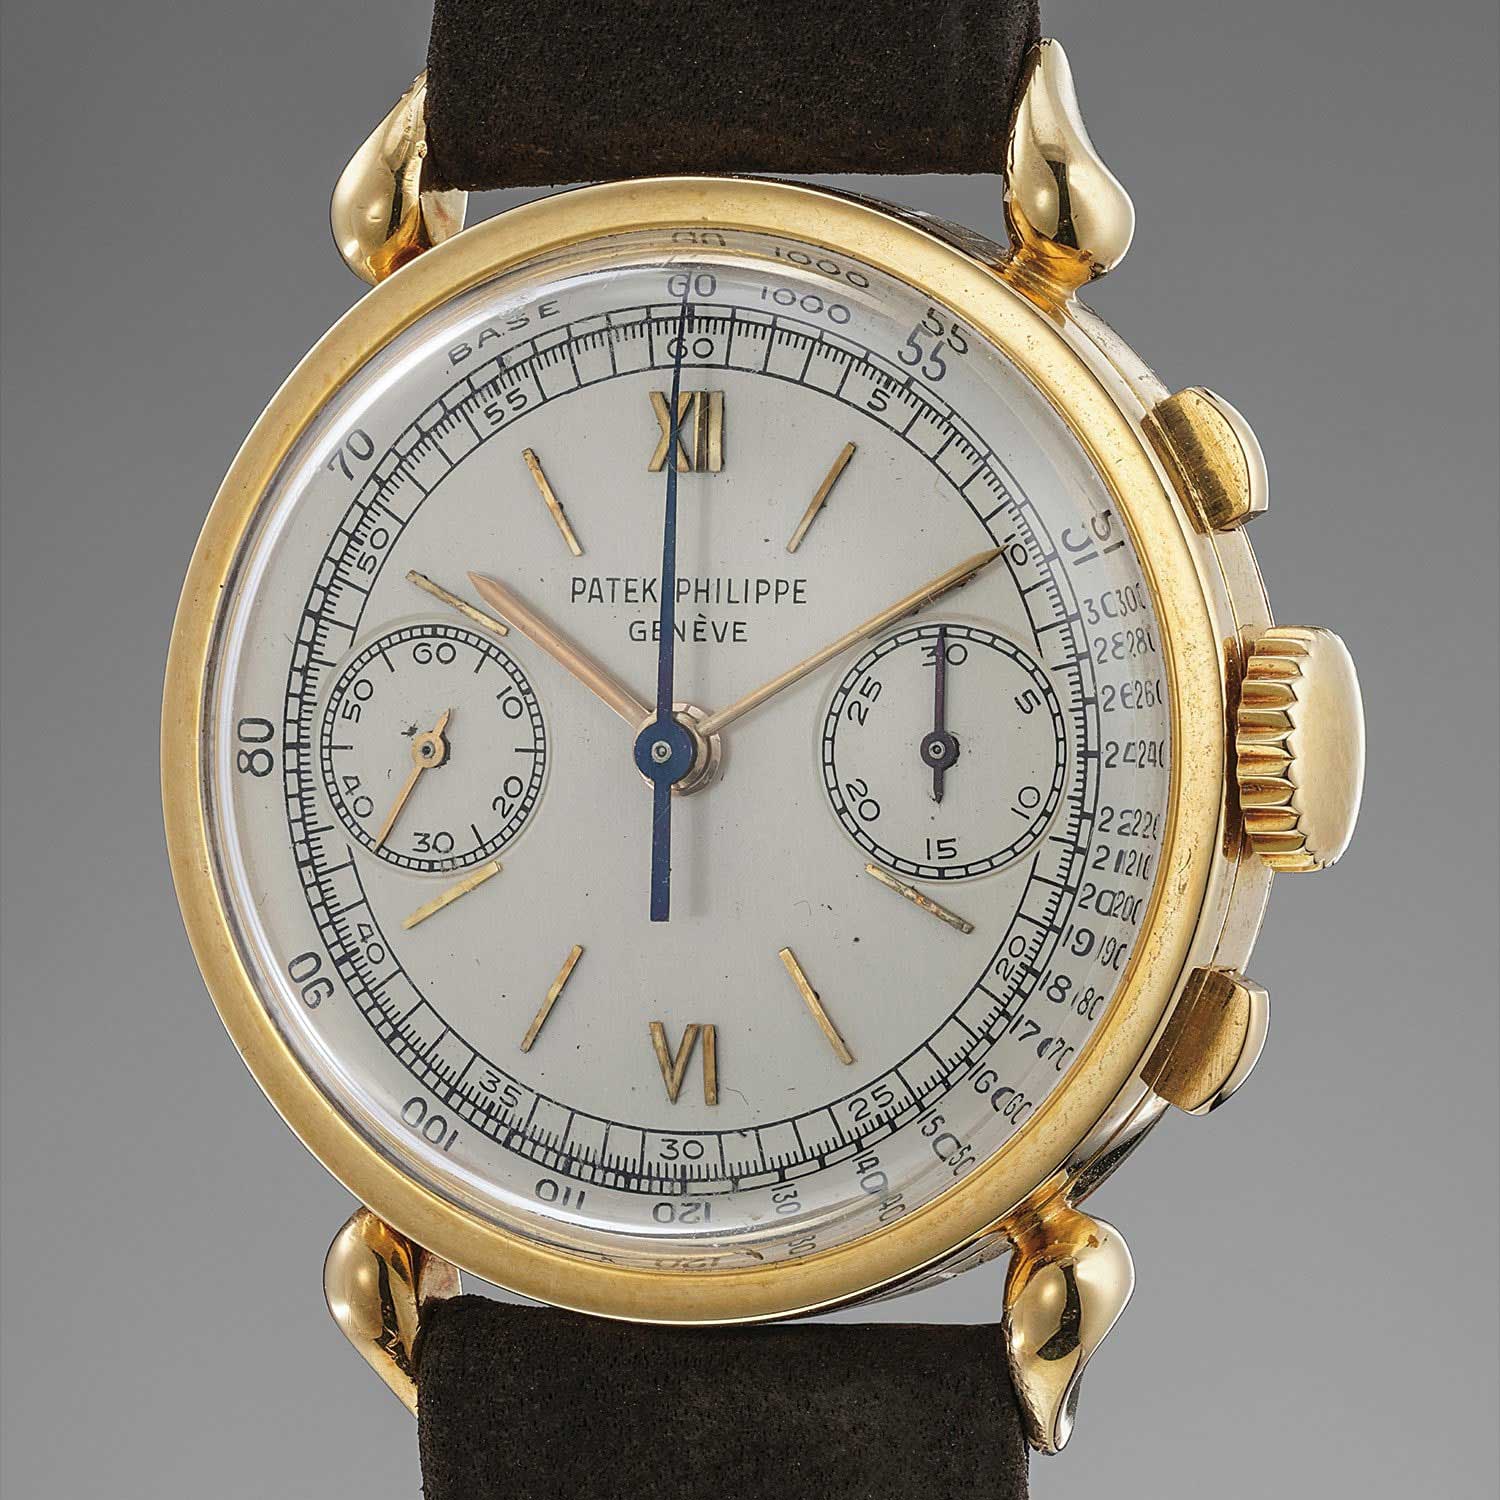 The Complete Guide to Patek Philippe Vintage Chronographs - Revolution